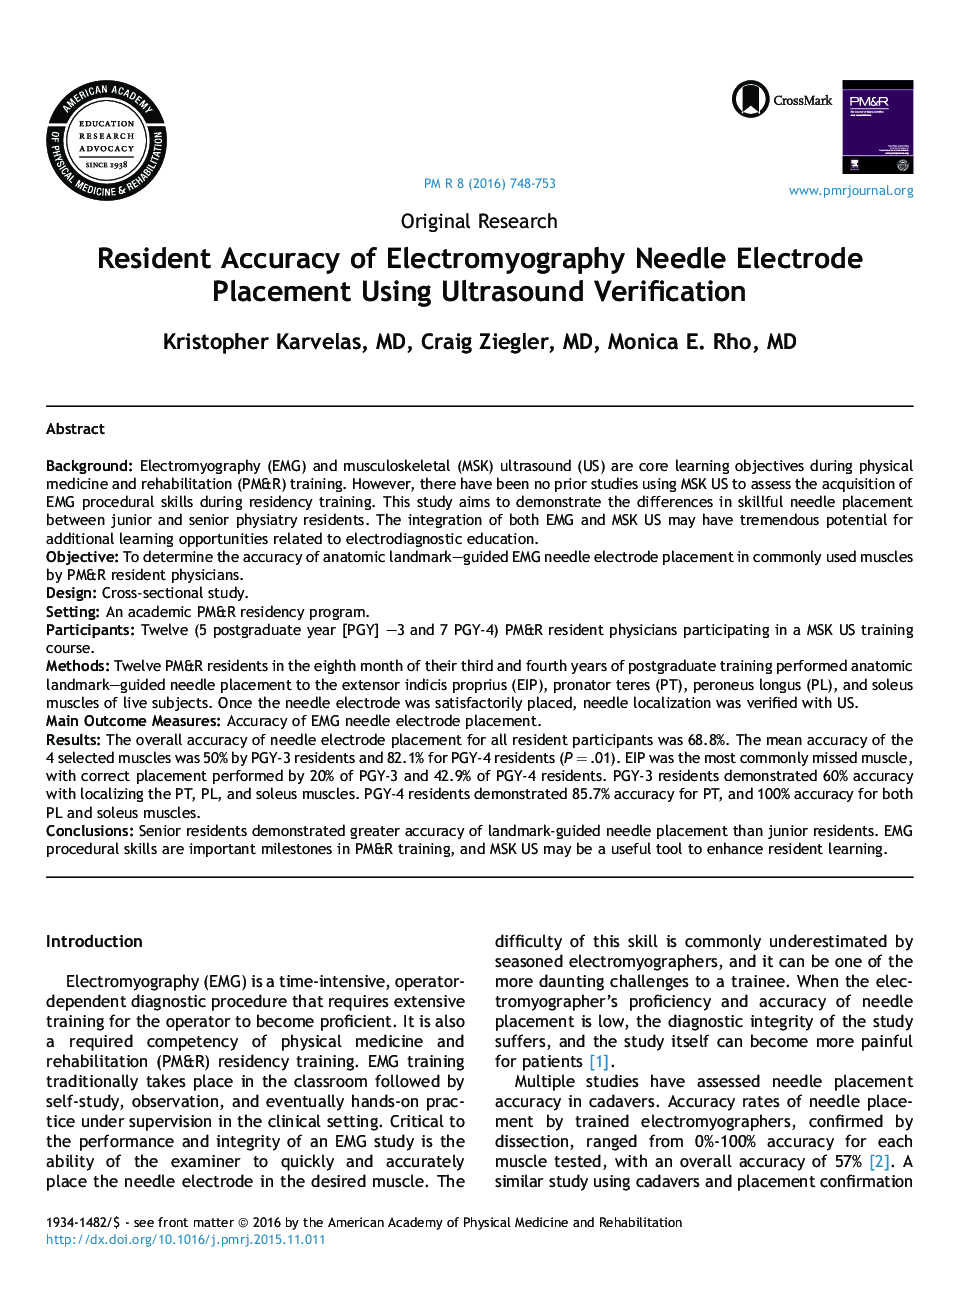 Resident Accuracy of Electromyography Needle Electrode Placement Using Ultrasound Verification